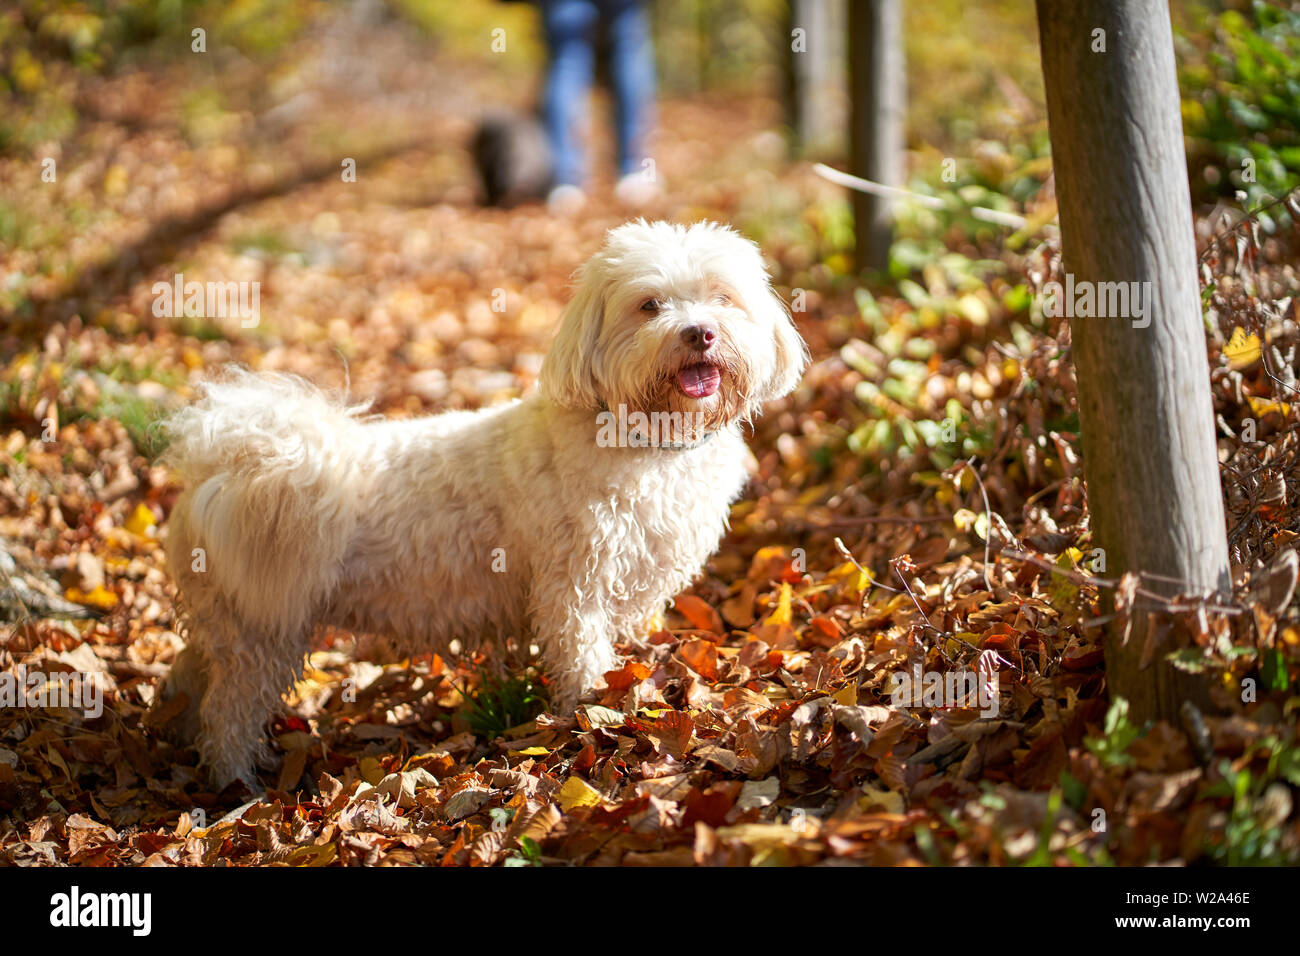 Black and white havanese dog sitting in forest in autumn with leaves looking Stock Photo